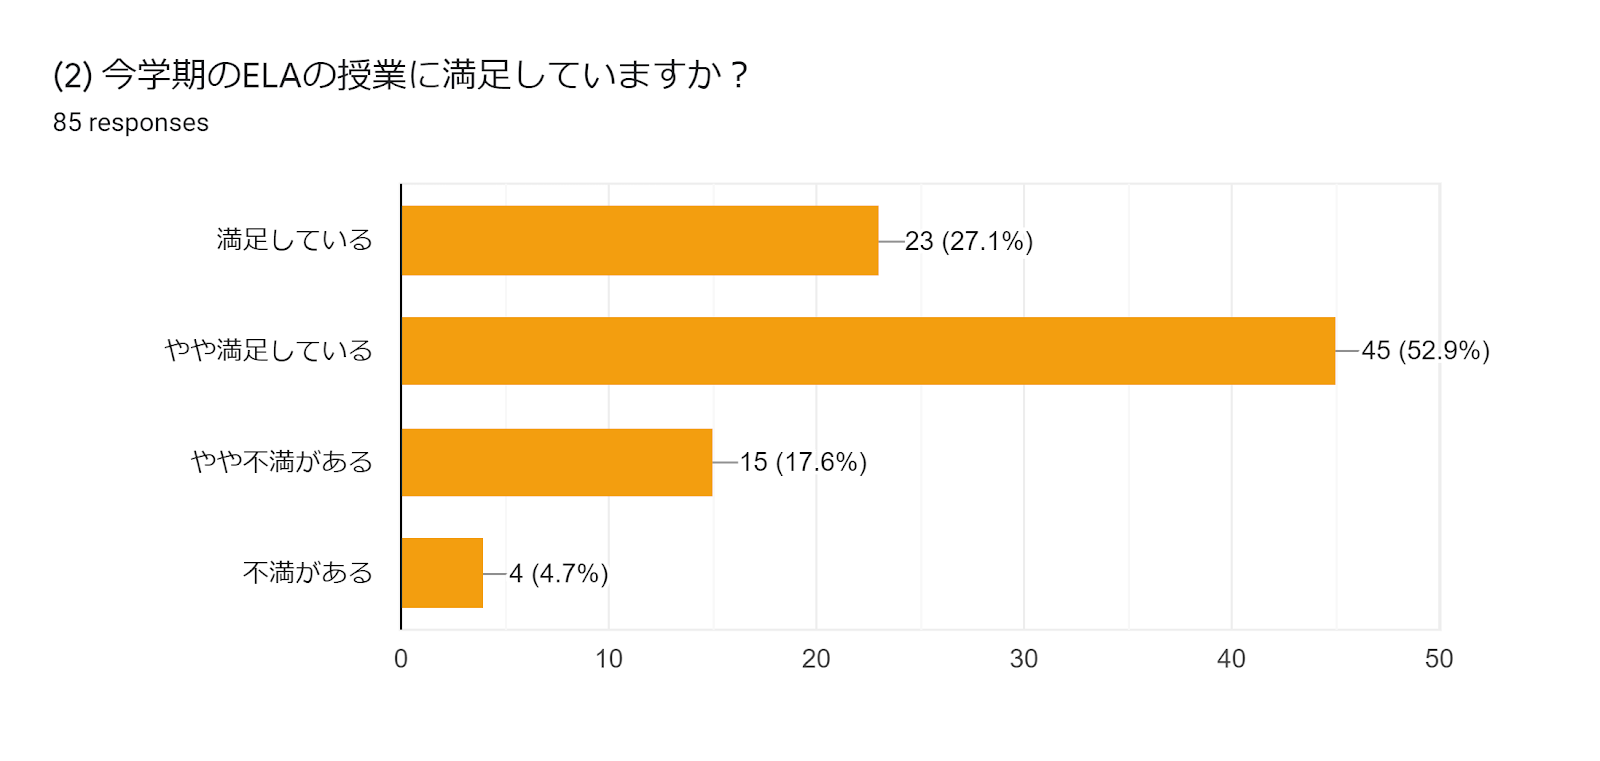 Forms response chart. Question title: (2) 今学期のELAの授業に満足していますか？. Number of responses: 85 responses.